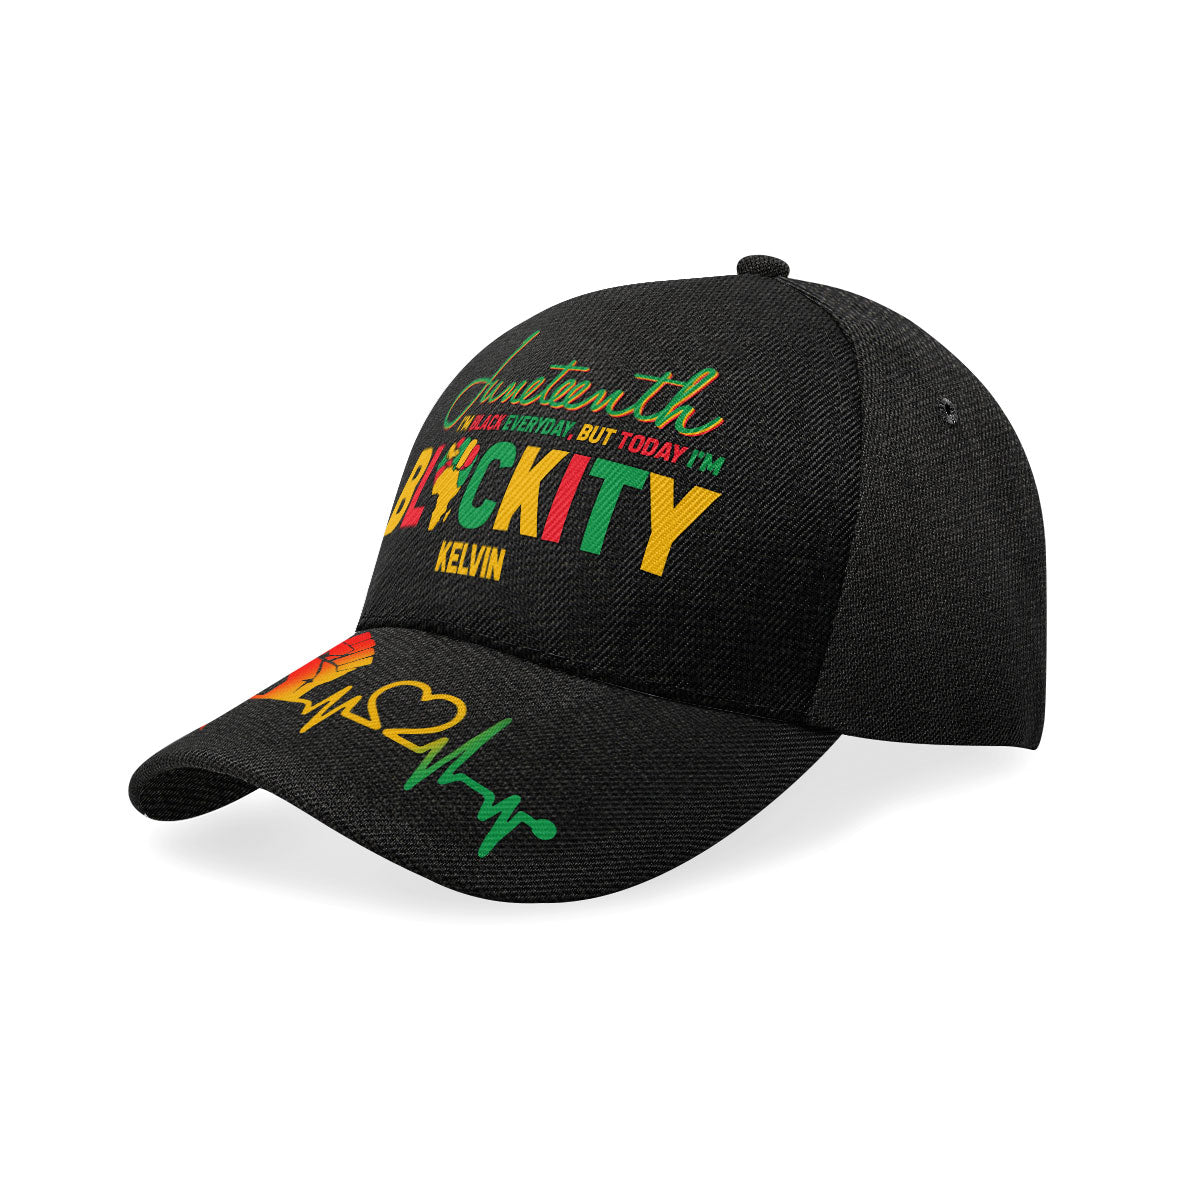 Juneteenth I'm Black Everyday But Today I'm Blackity | Personalized Classic Cap JSCCH876